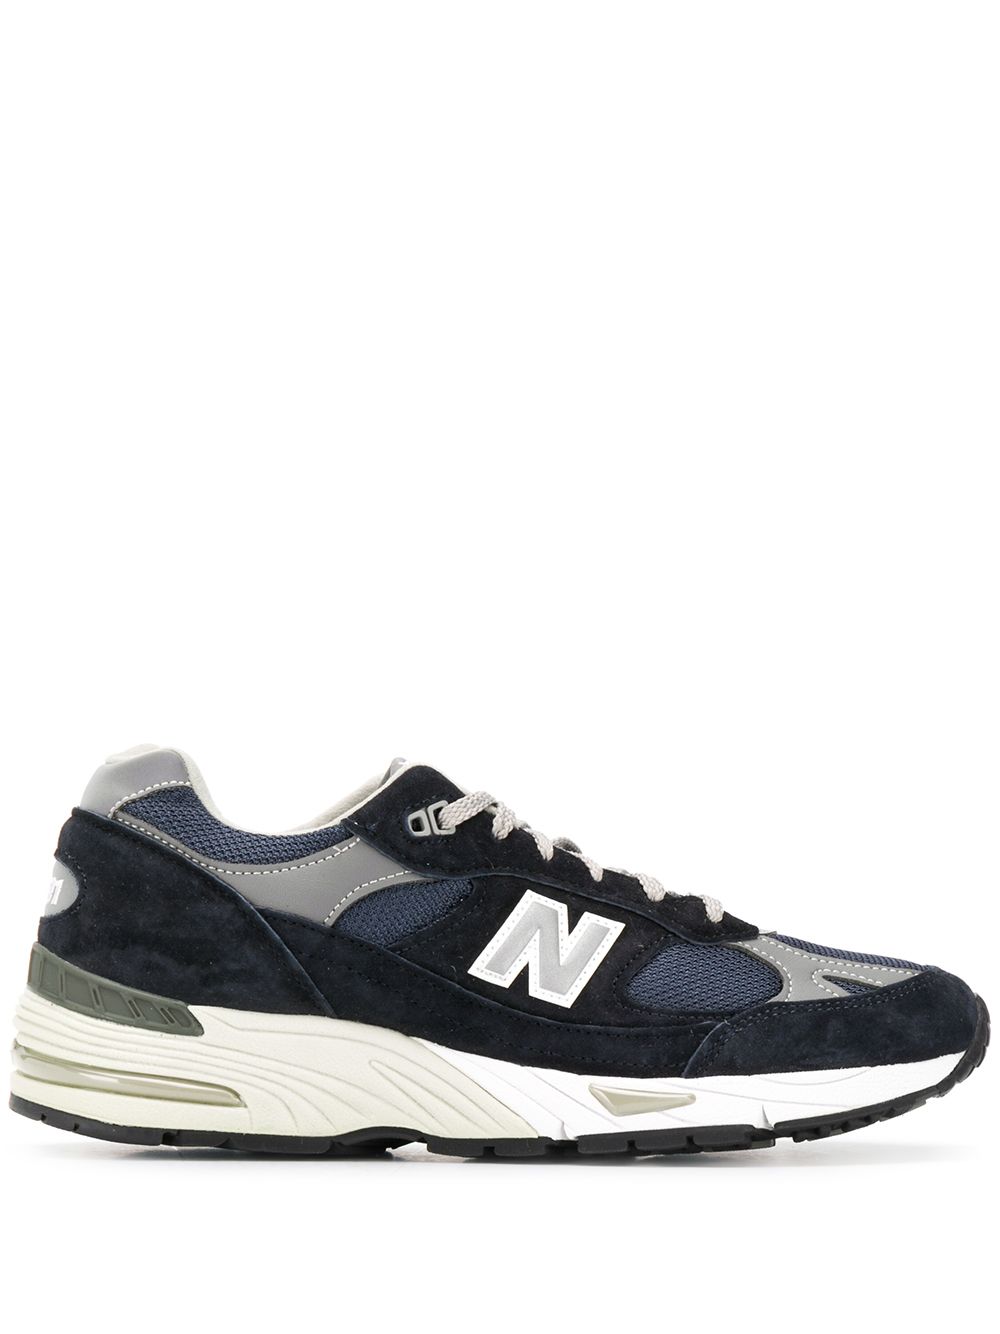 New Balance 991 sneakers - Blue